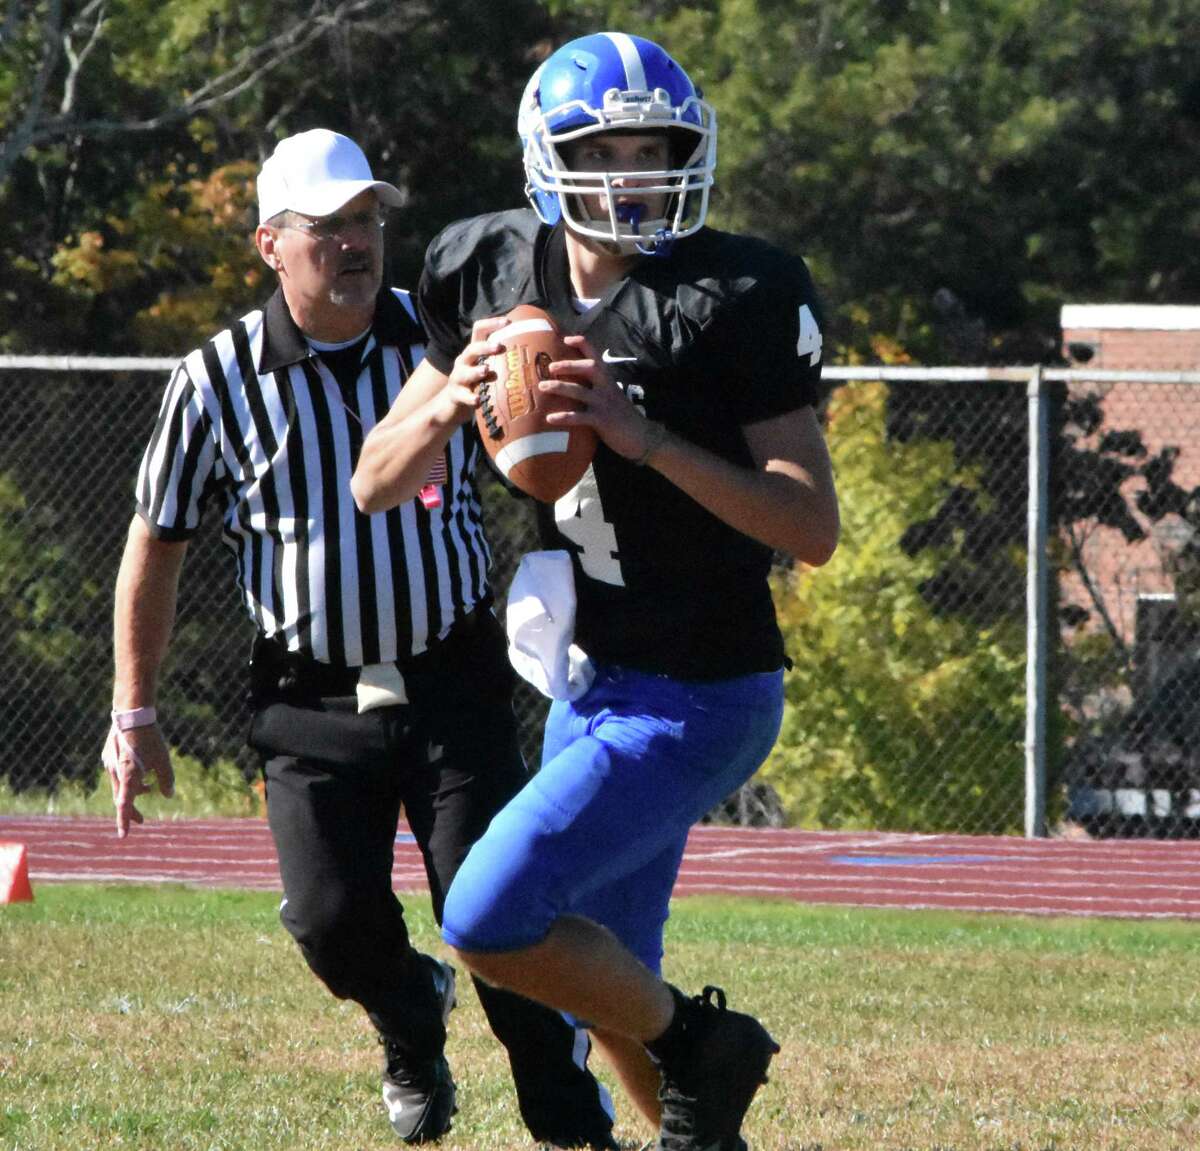 Stafford/East Windsor/Somers quarterback Tyler Ouellette rolls out against Valley Regional at Stafford high school on Saturday, Oct. 5, 2019. (Pete Paguaga, Hearst Connecticut Media)